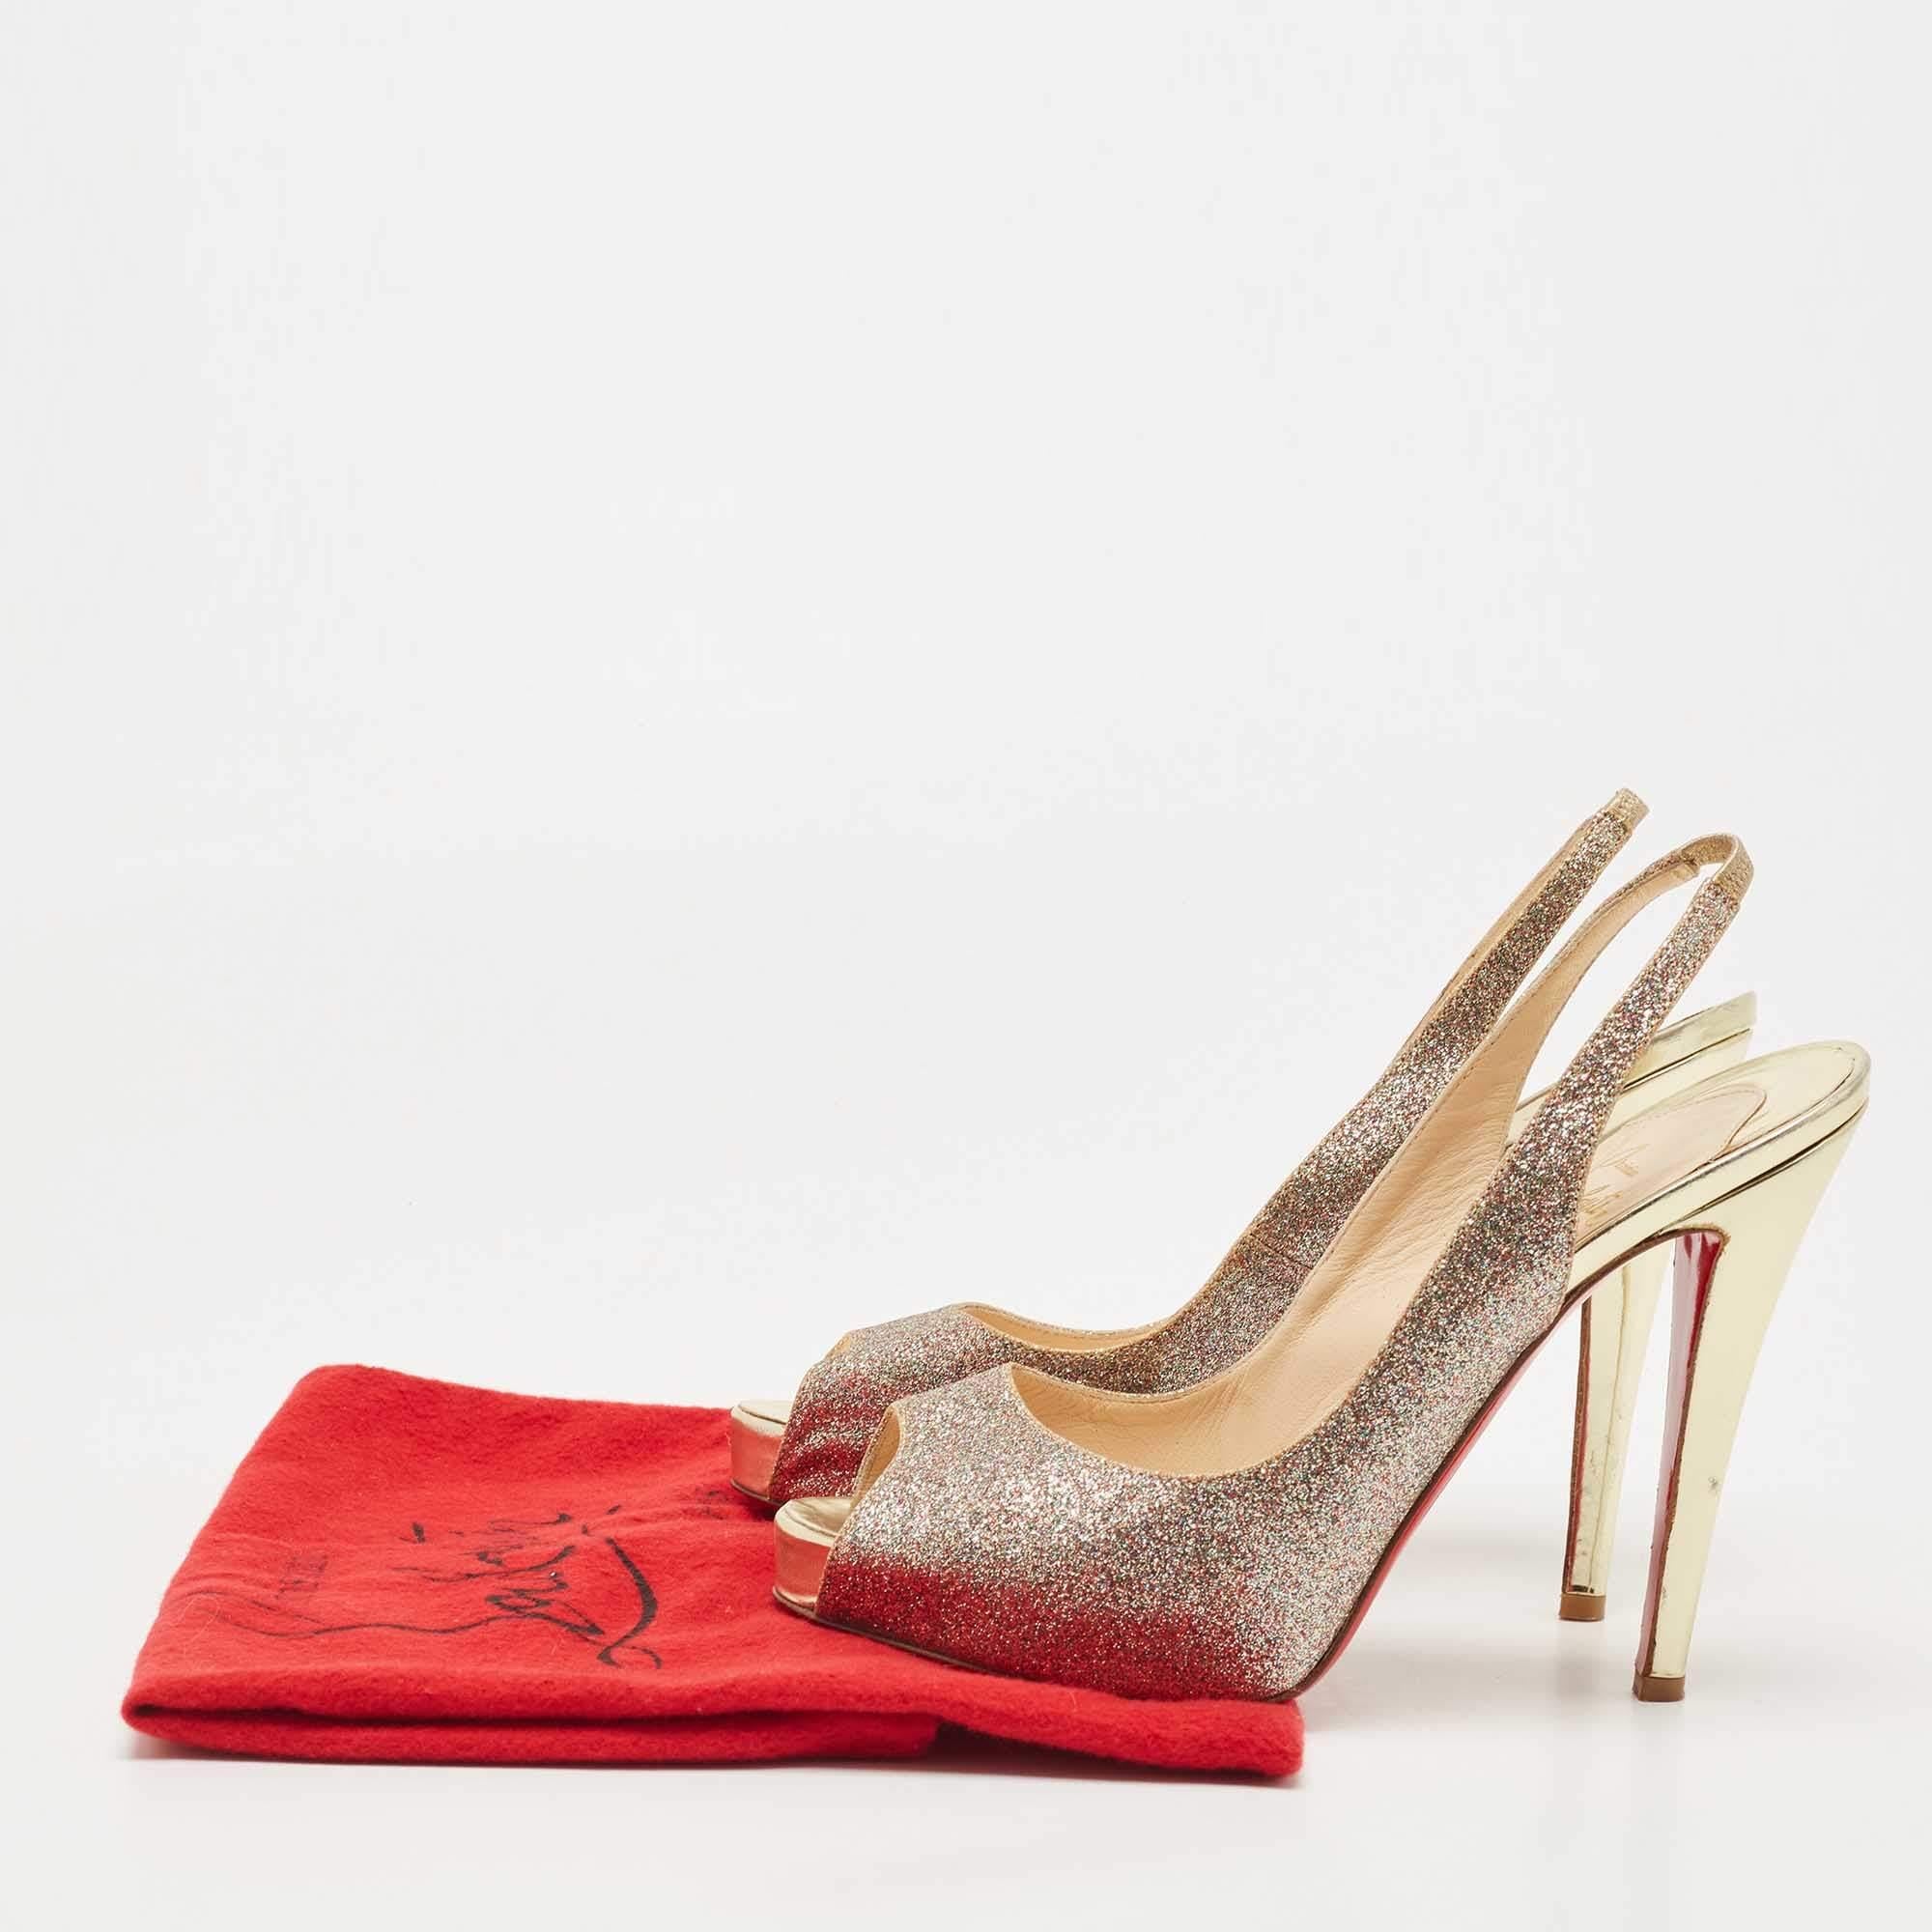 Christian Louboutin Metallic Gold Glitter Private Number Sandals Size 39 5